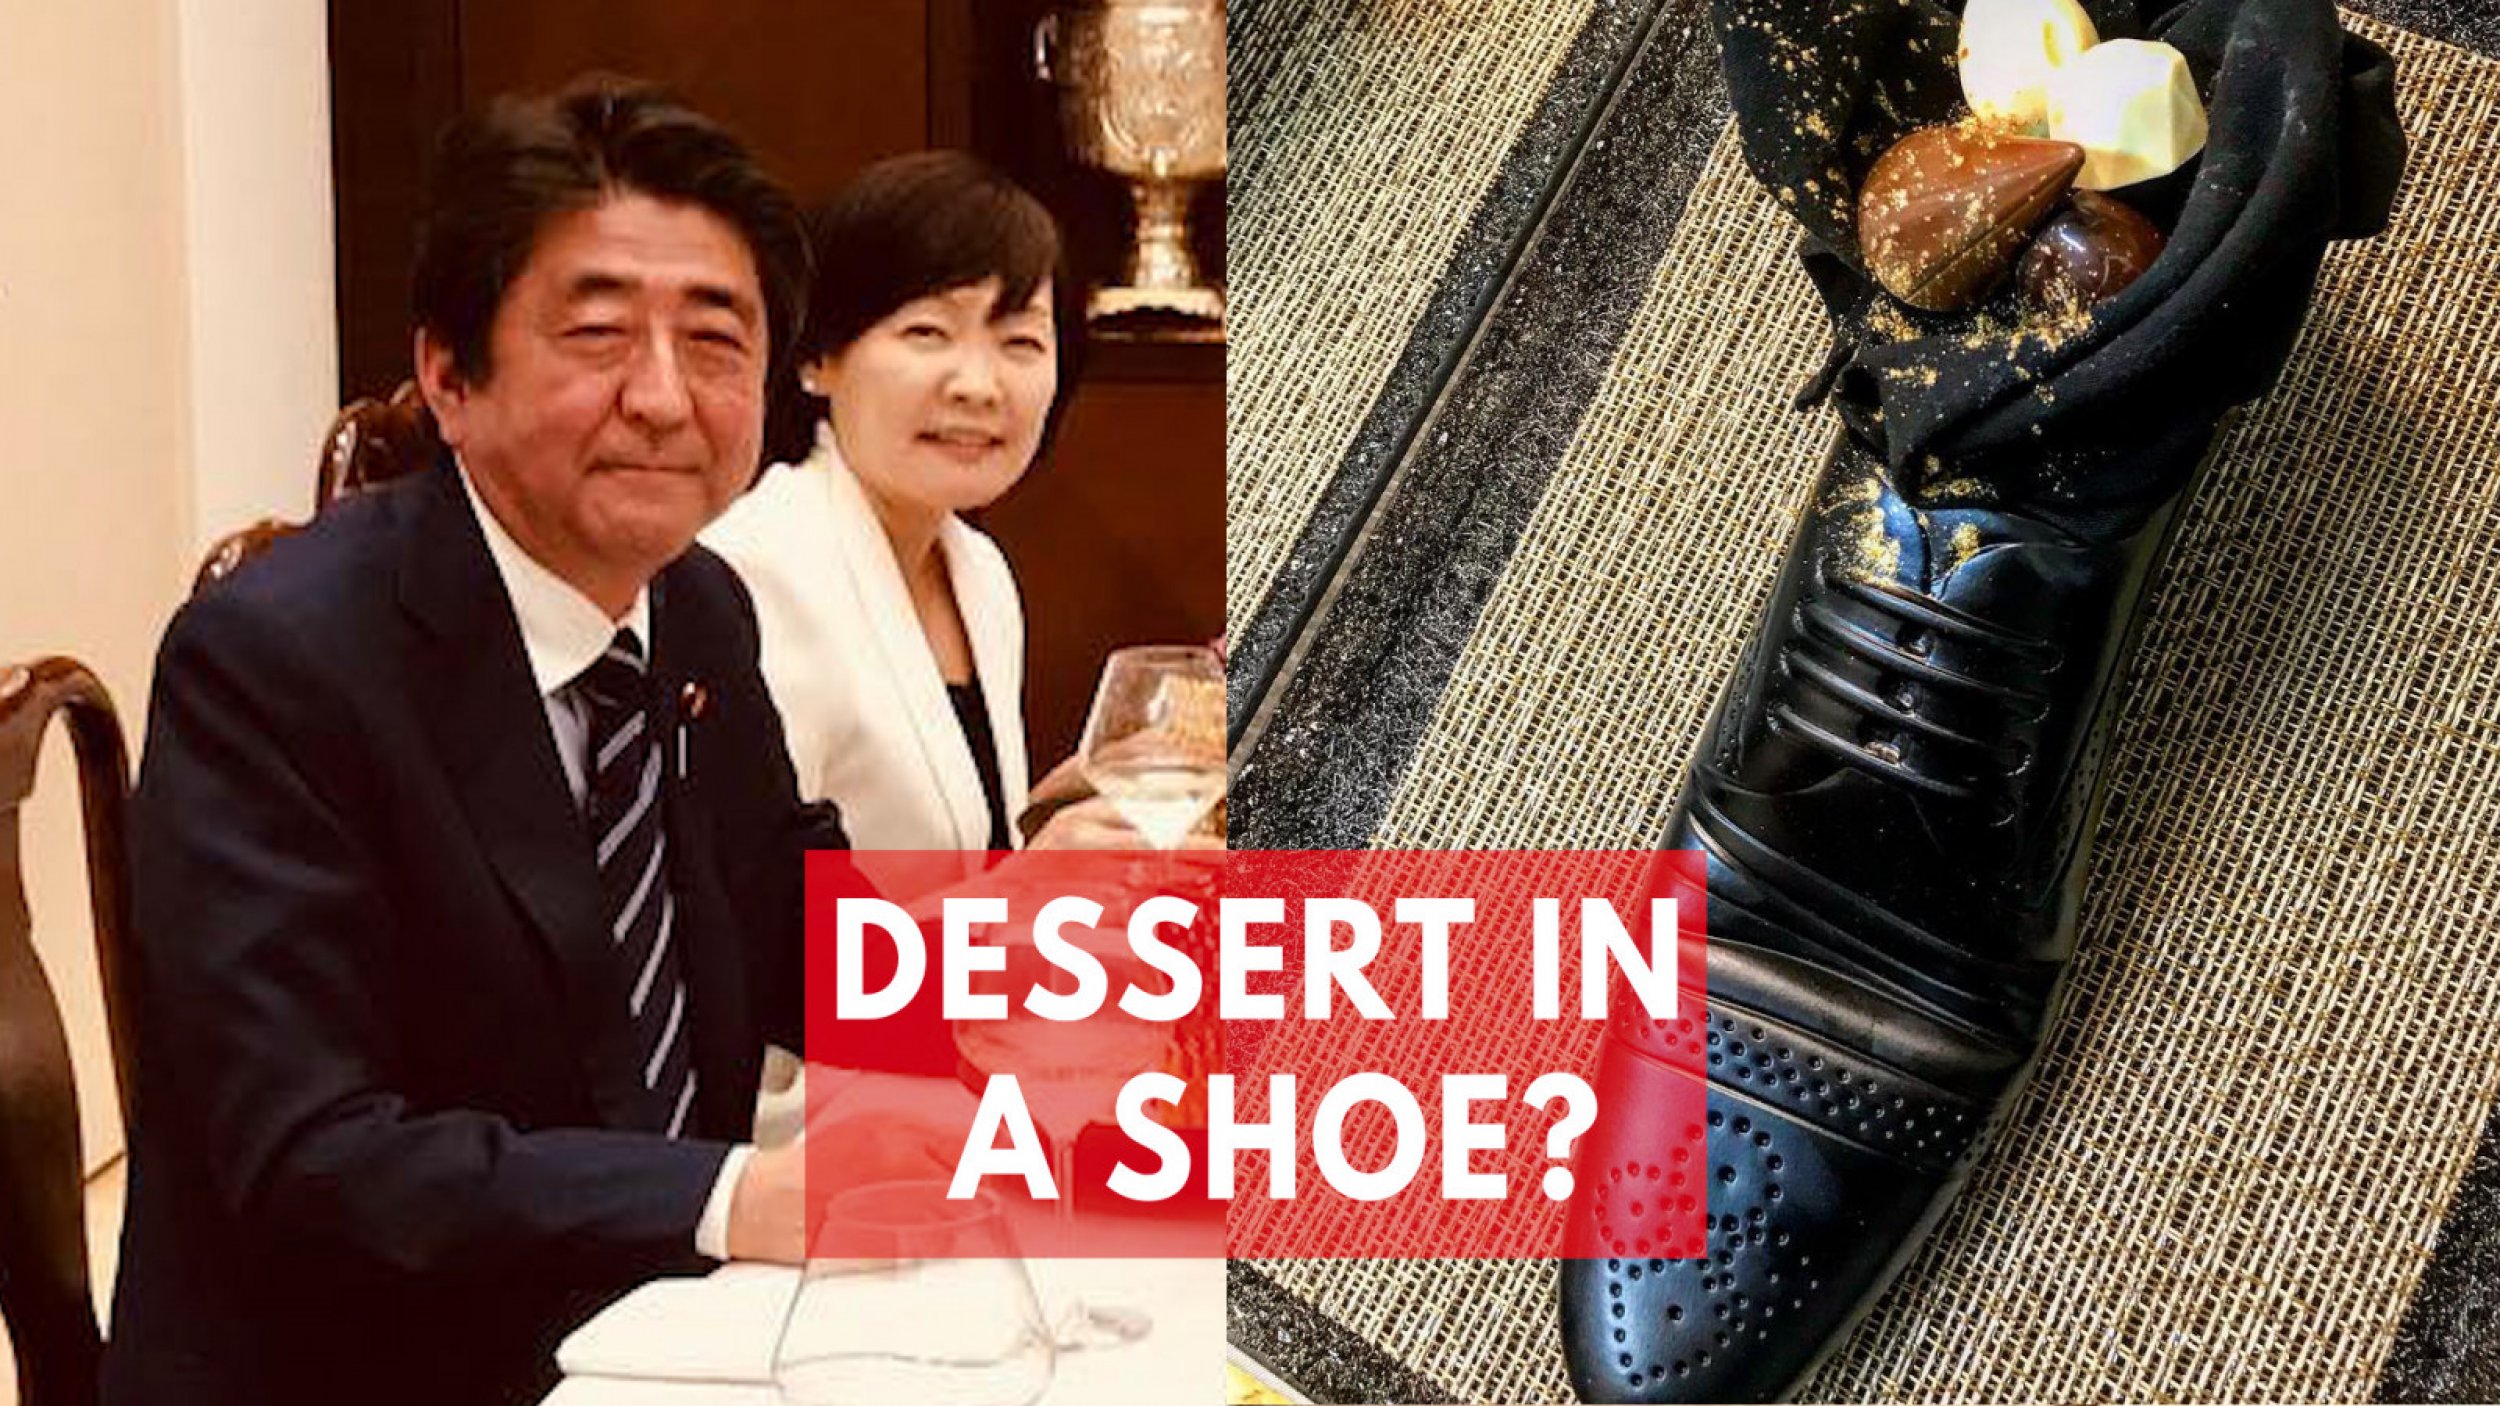 Israels Shoe Dessert For Japan PM Shinzo Abe Causes Outrage